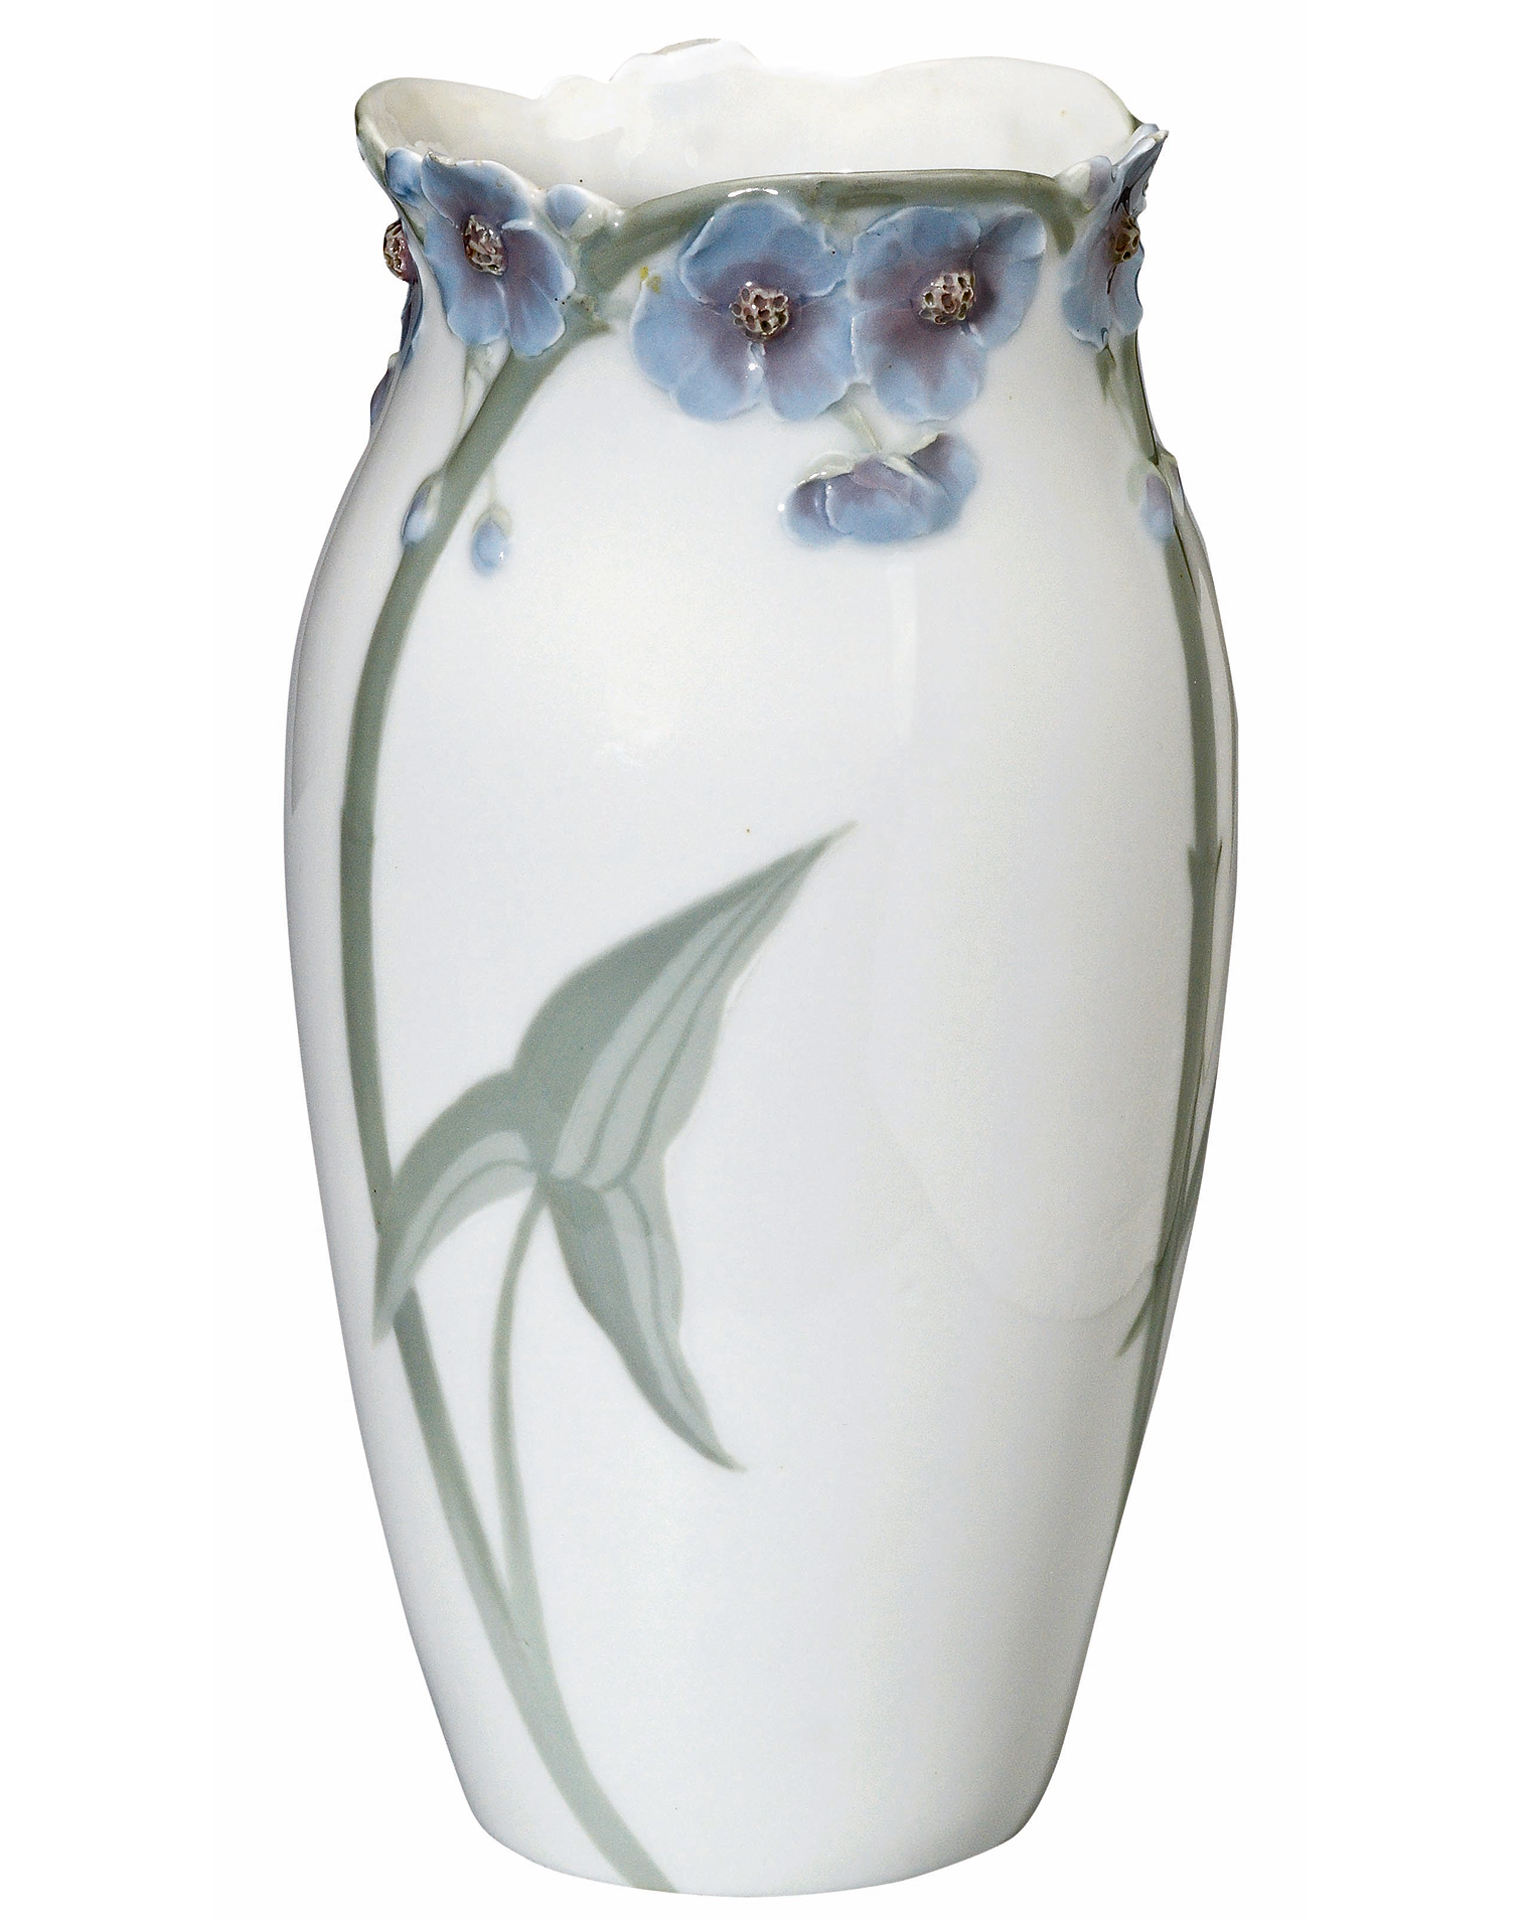 On display is a narrow porcelain vase with an outward-facing opening that initially becomes more bulbous towards the top. The vase is decorated with a floral motif on a white ground. Two branches in light sage green entwine from the base to the opening of the vase. The opening is decorated with small light blue flowers.